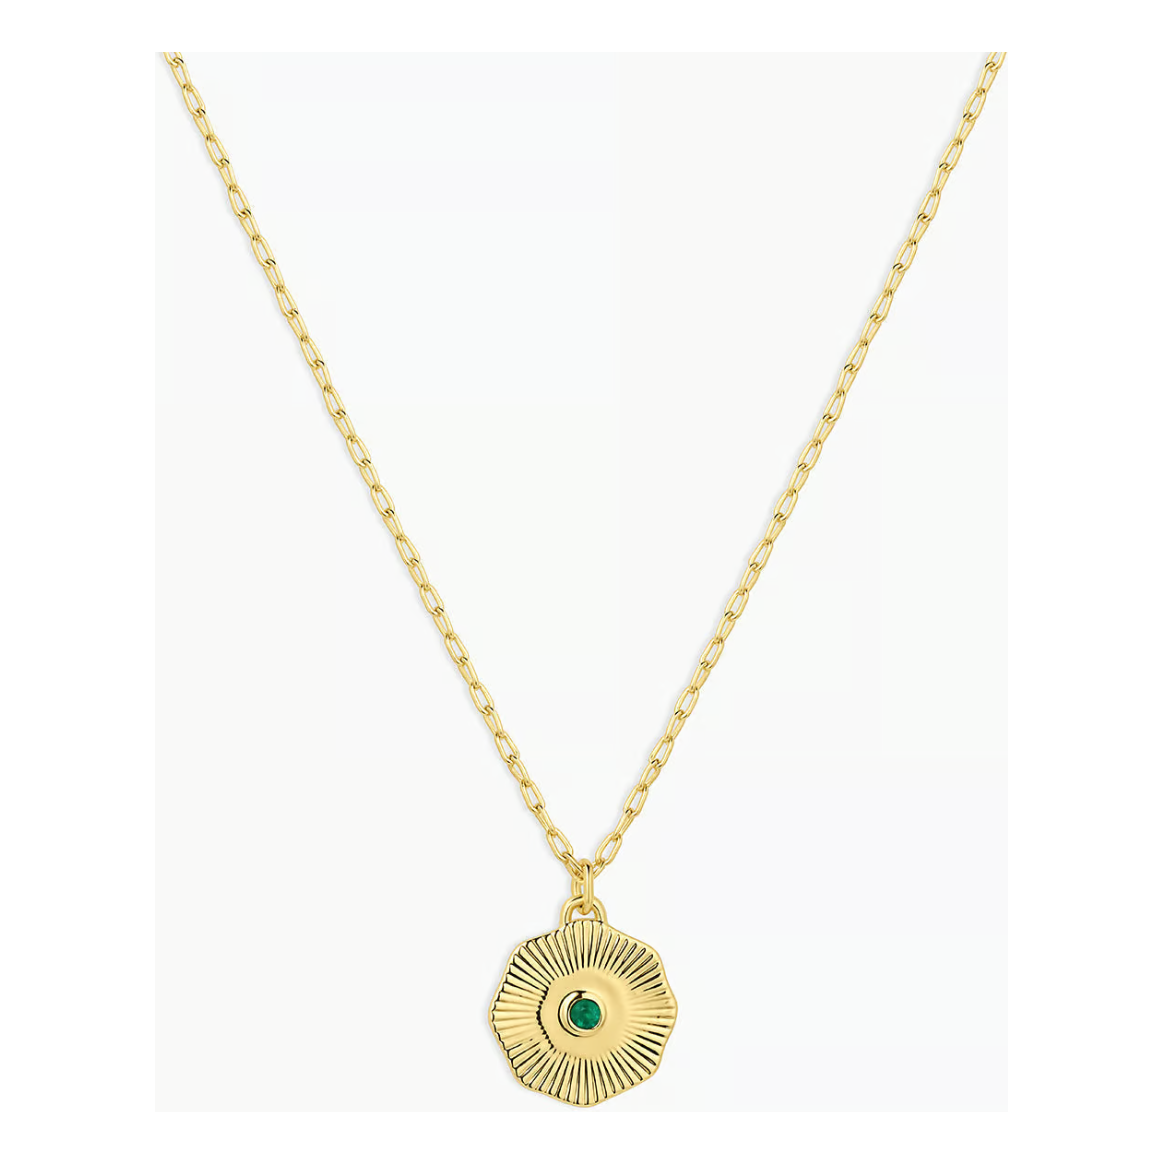 Birthstone Coin Necklace - May